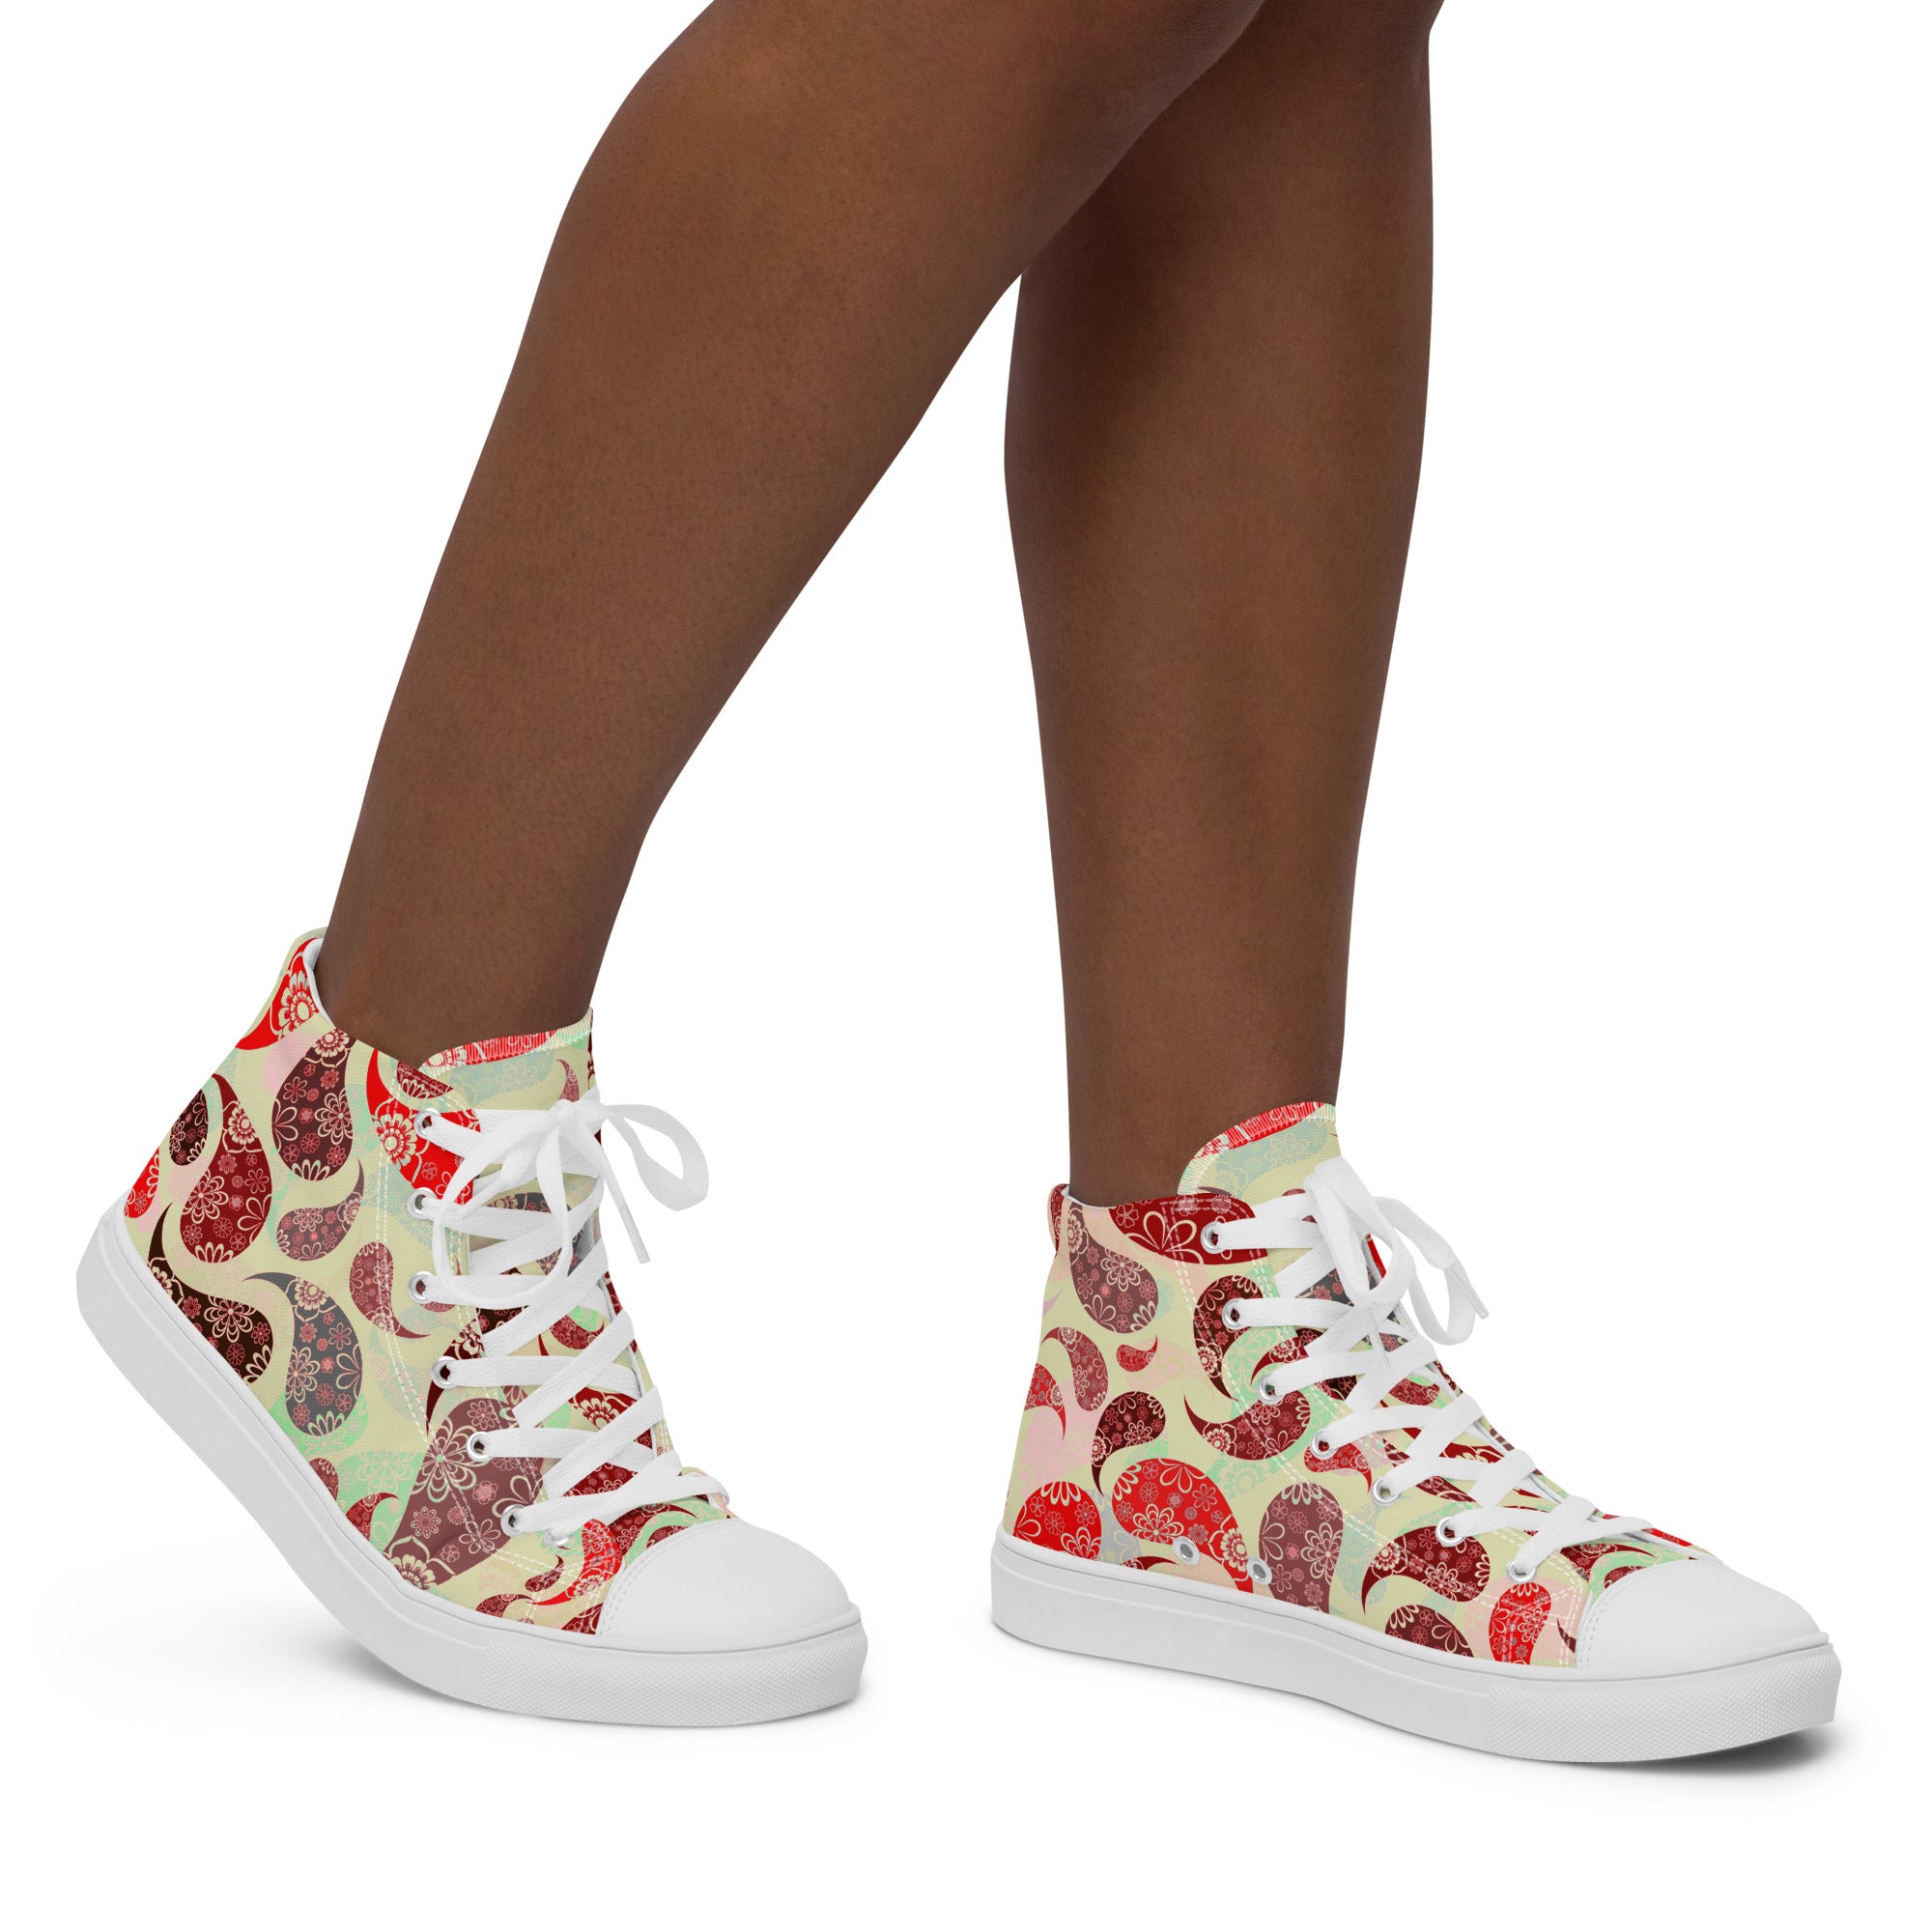 Women’s high top canvas shoes- Paisley Pattern IV